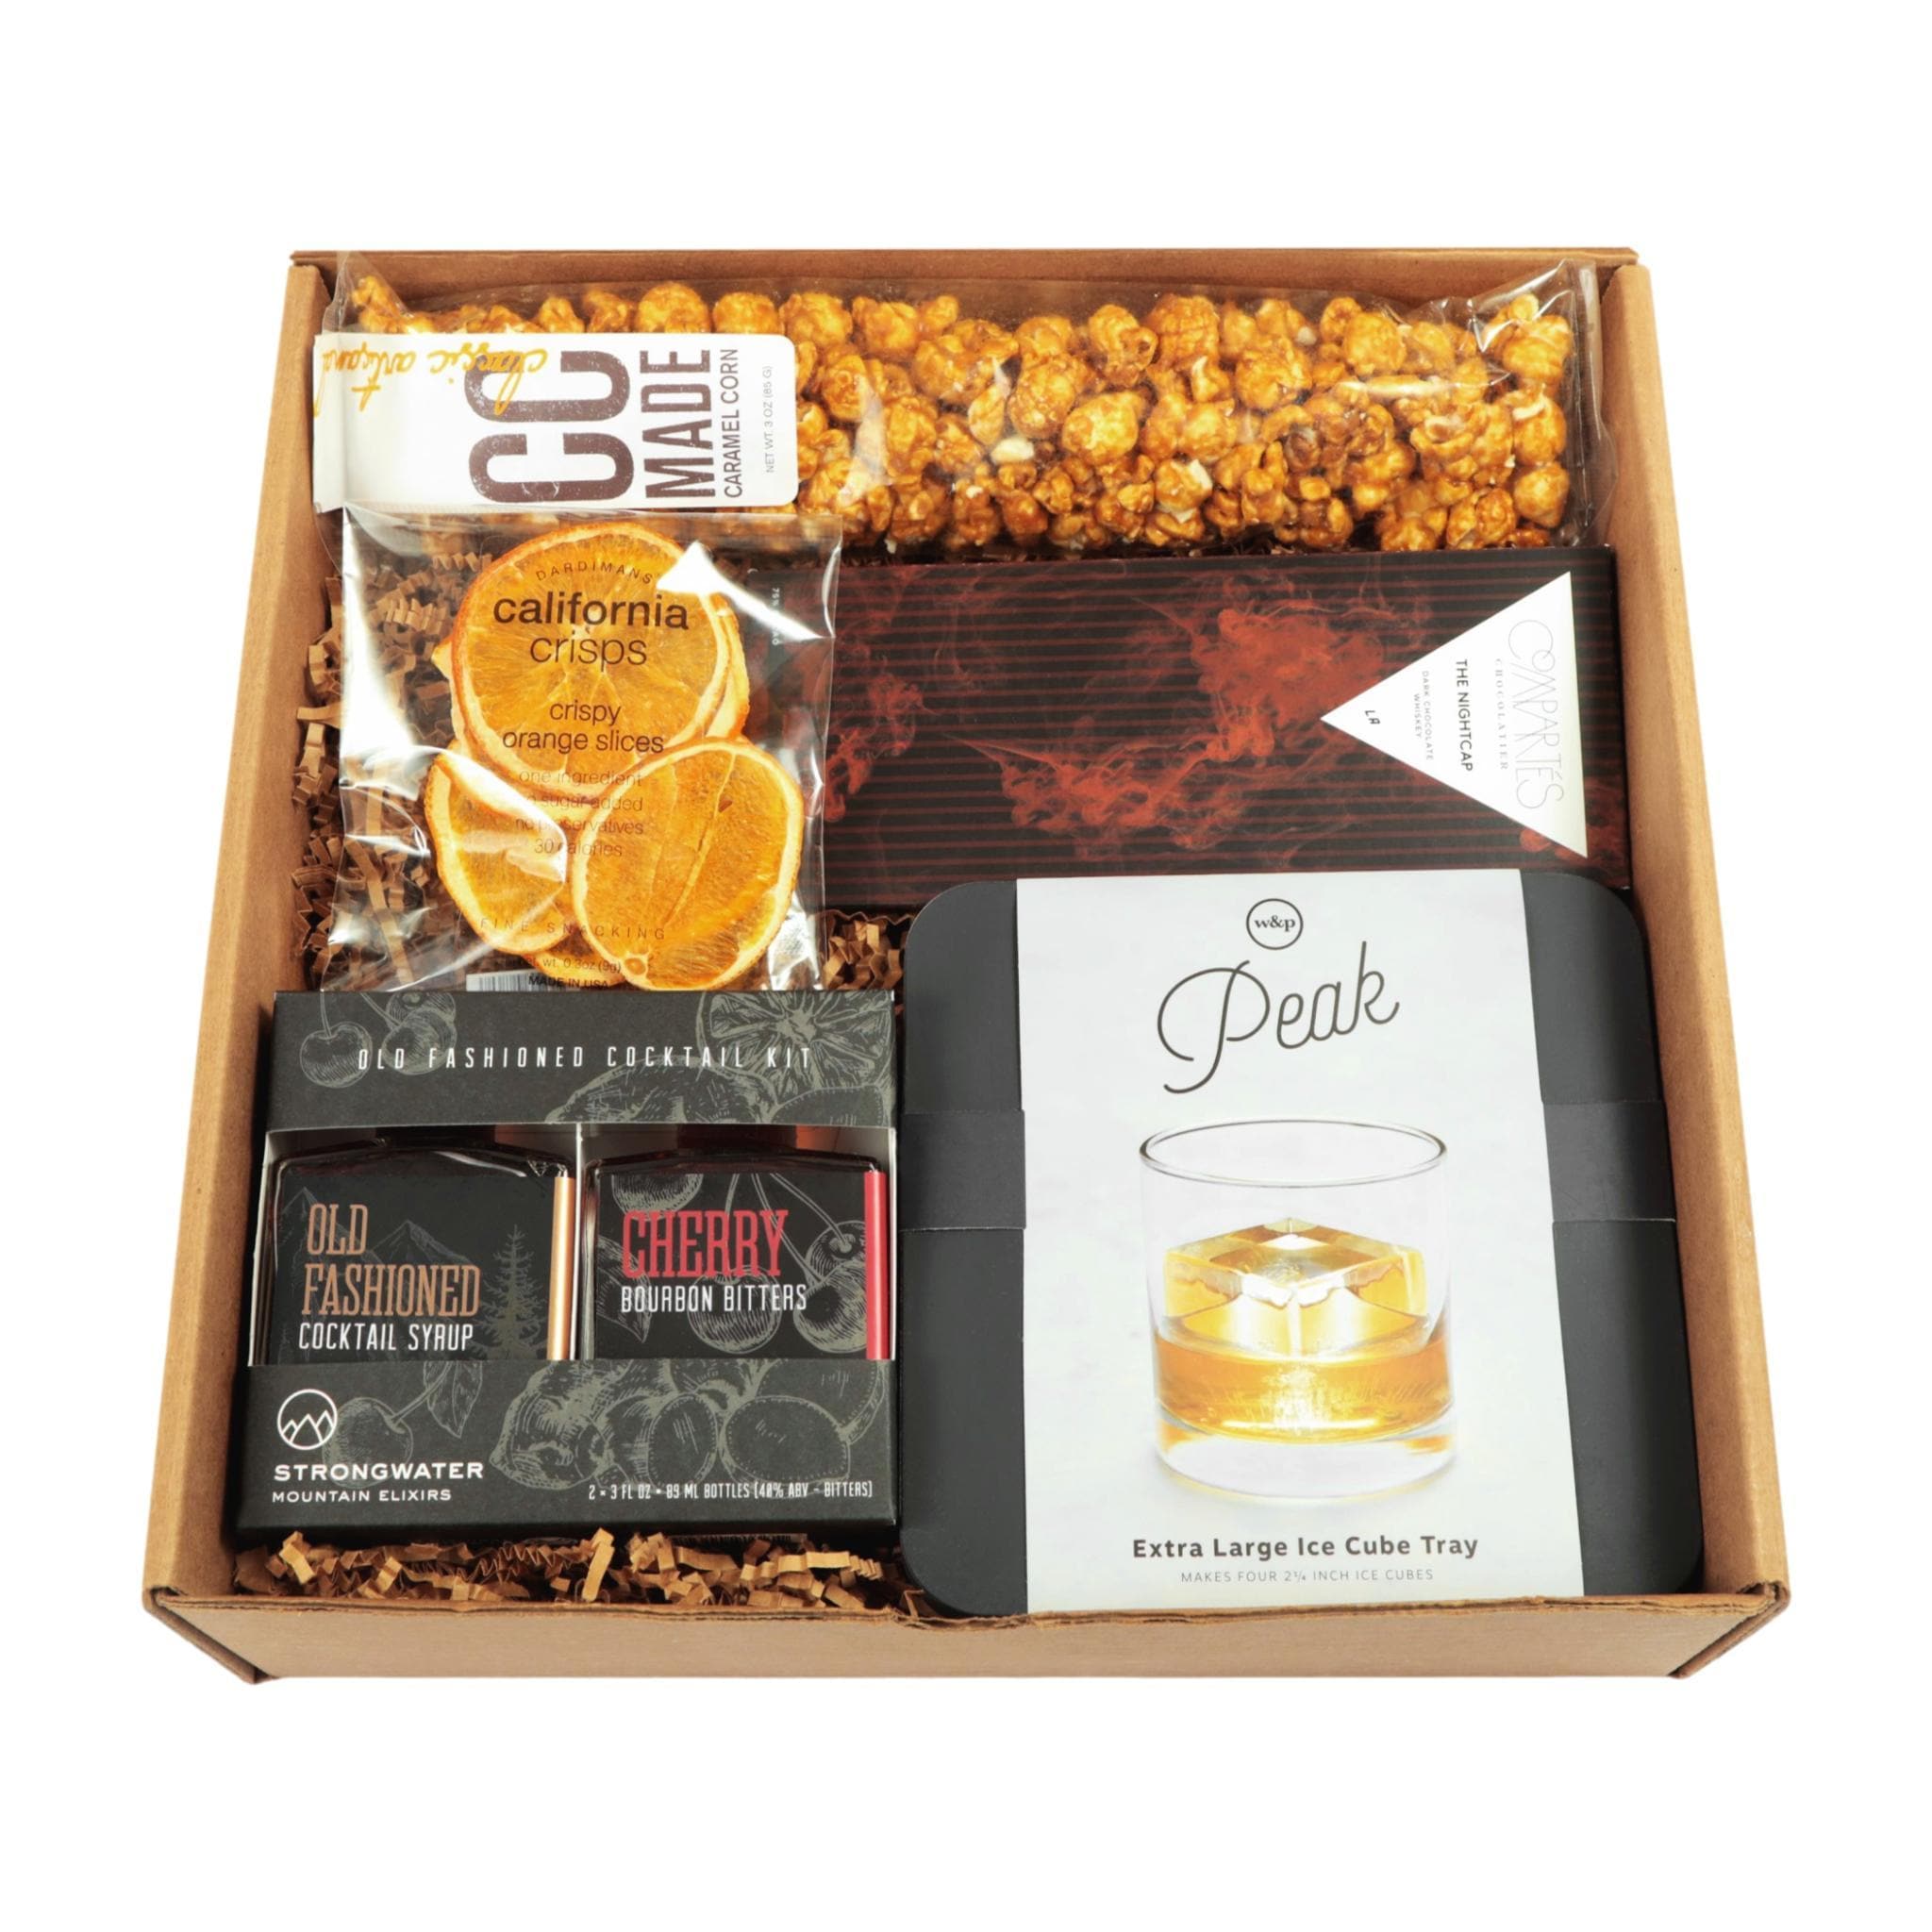 Whiskey Appreciation Crate